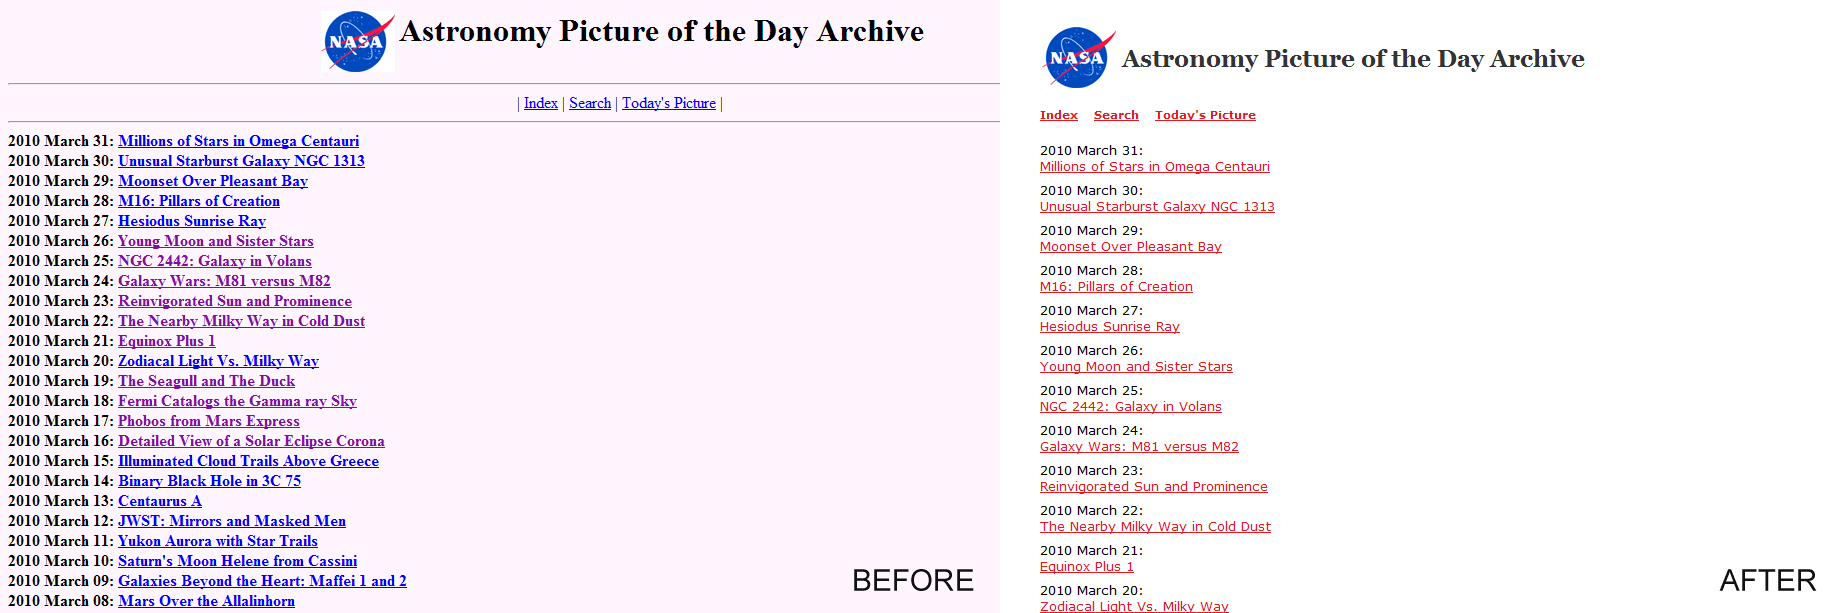 Nasa picture archive, before and after.